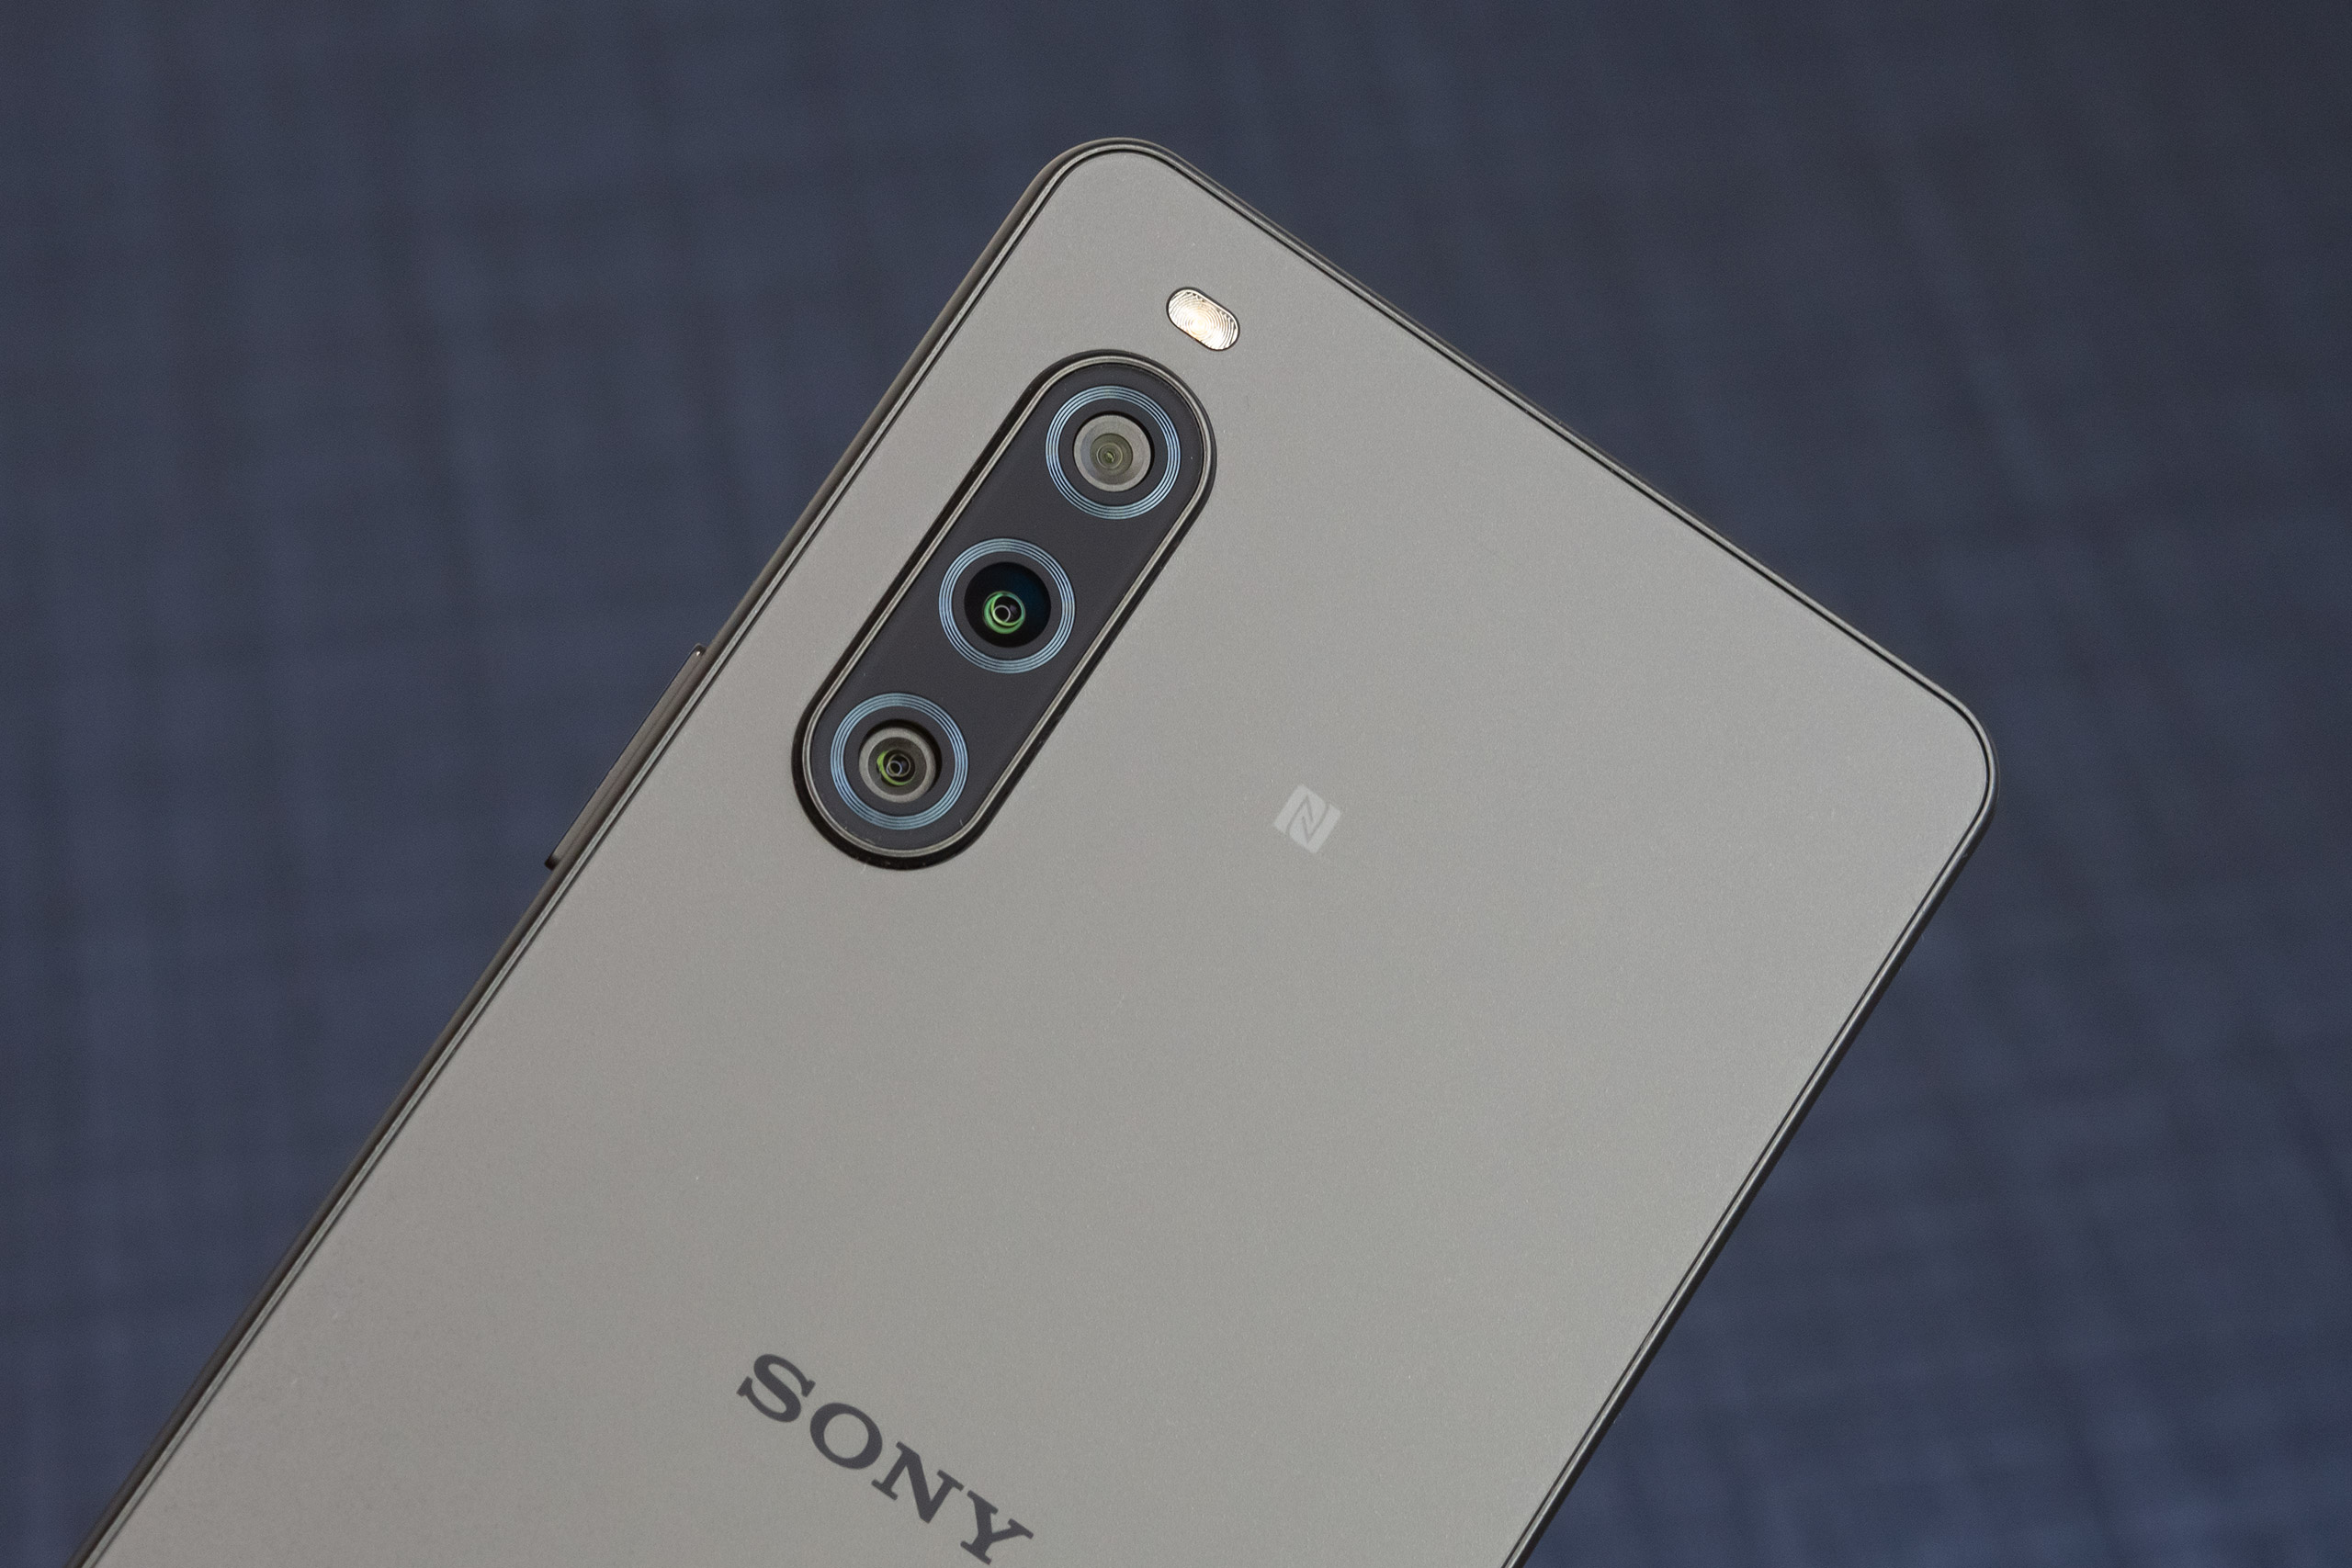 Sony Xperia 10 V will Weigh Less and Have Bigger Sensors